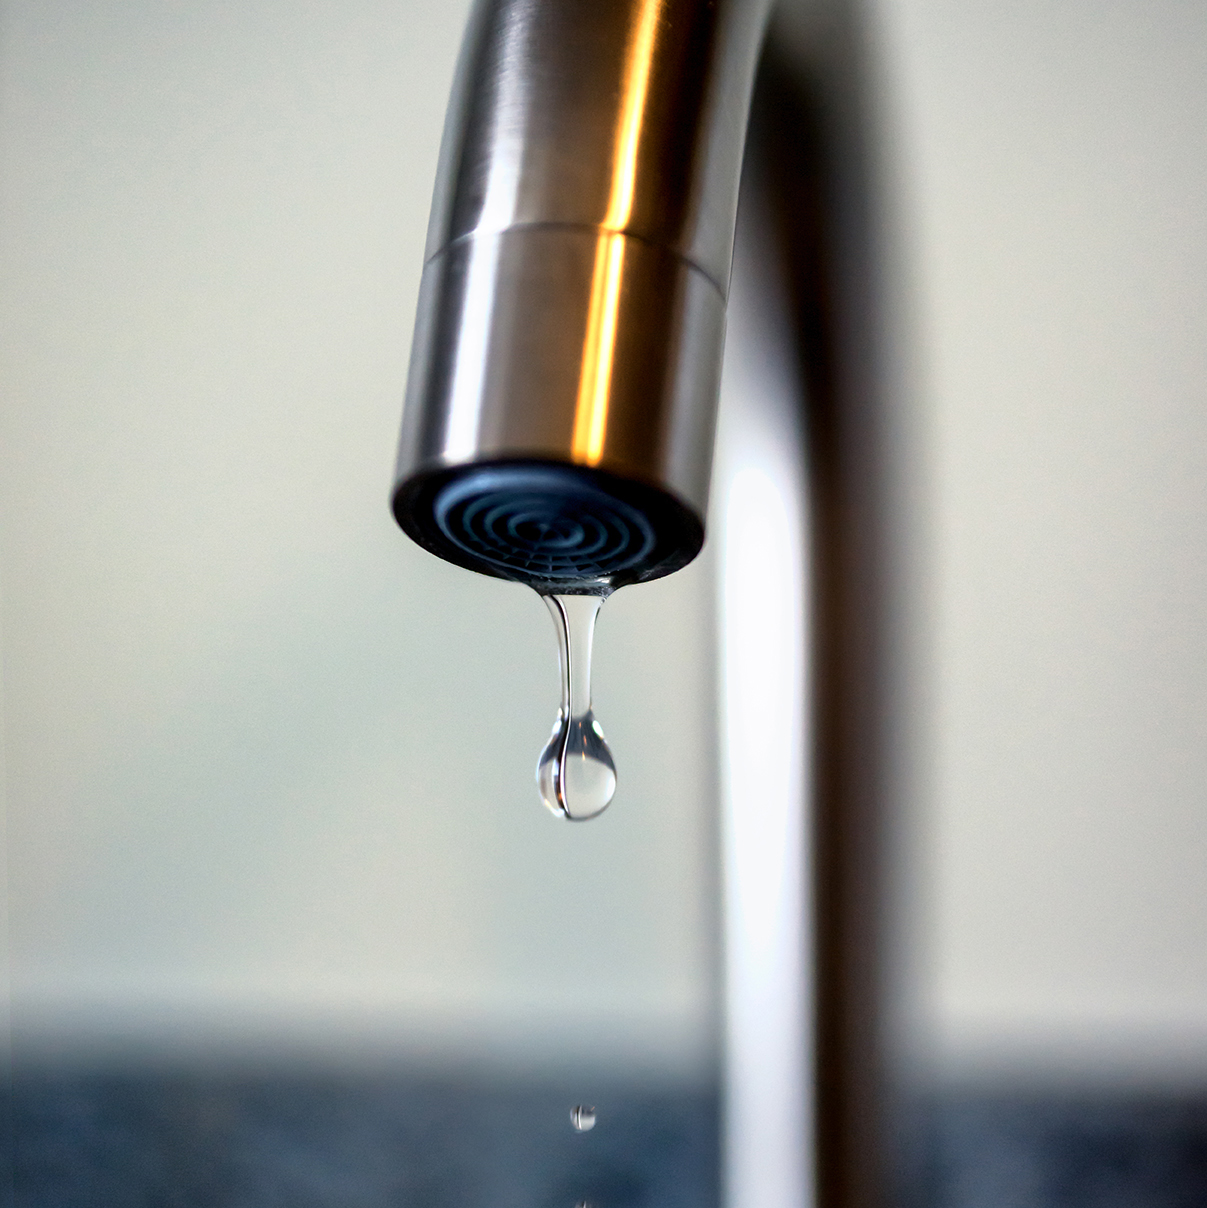 What could cause a dripping tap?